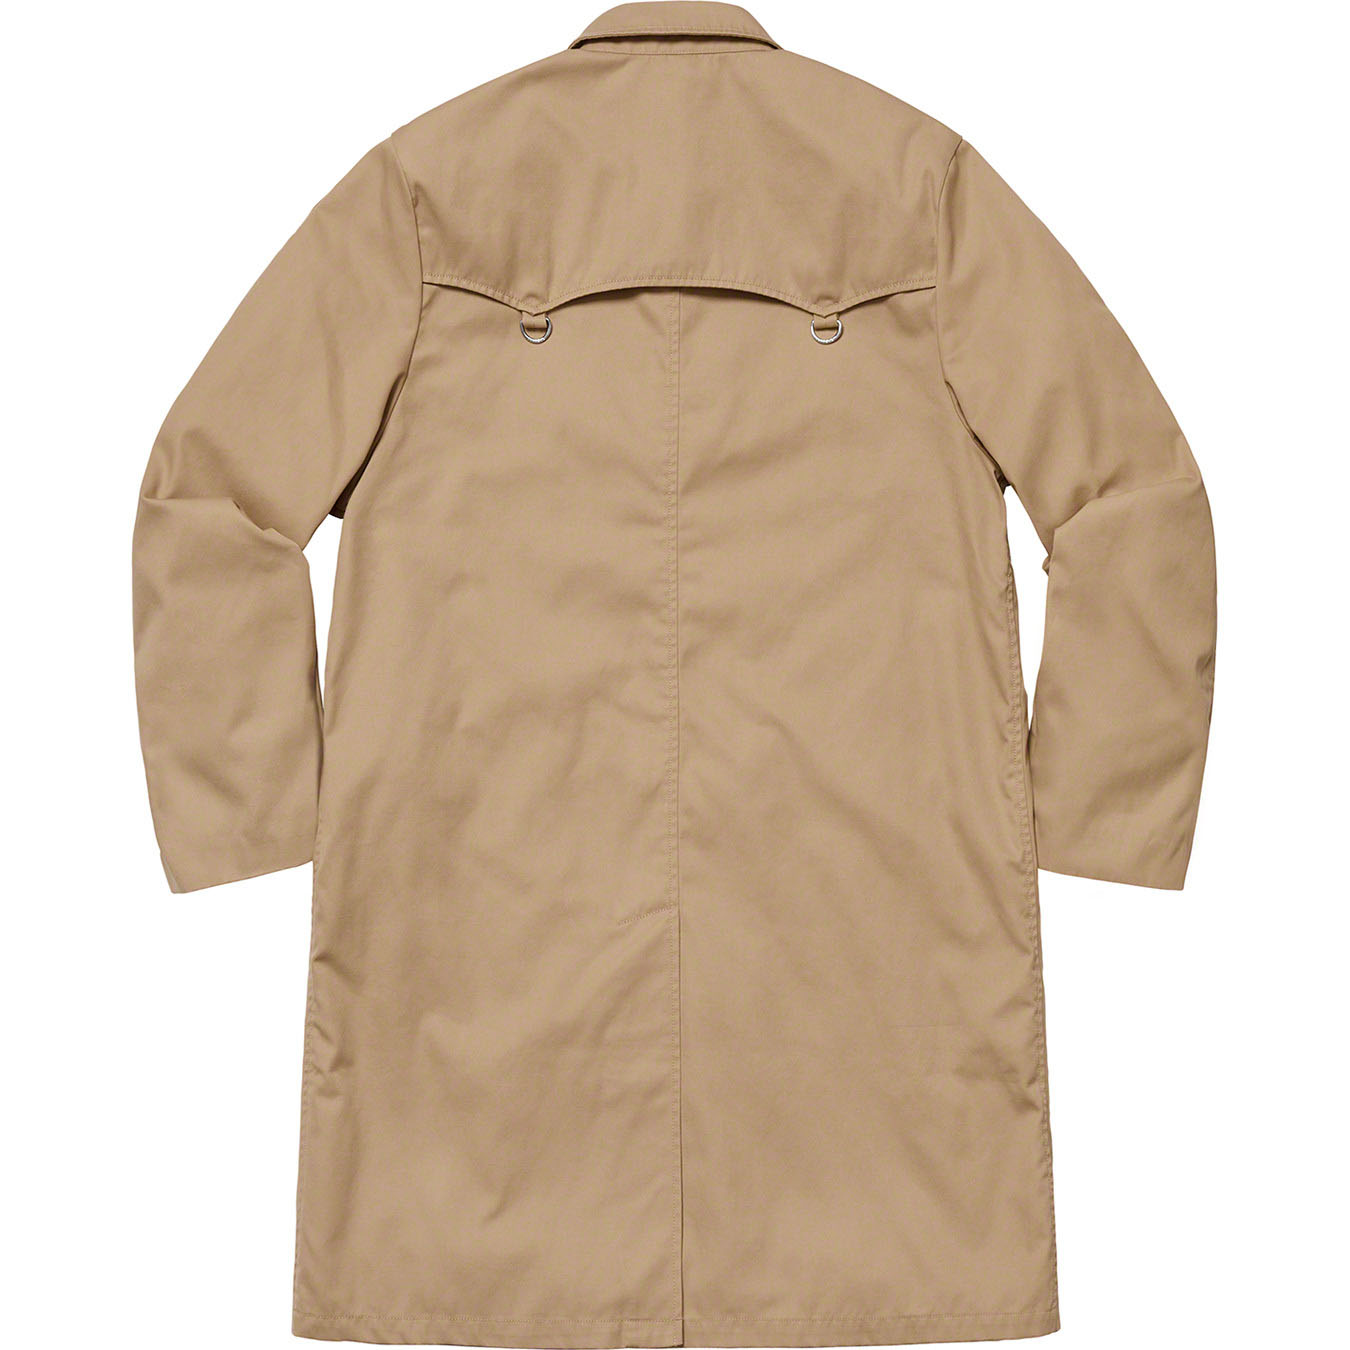 Supreme D-Ring Trench Coat